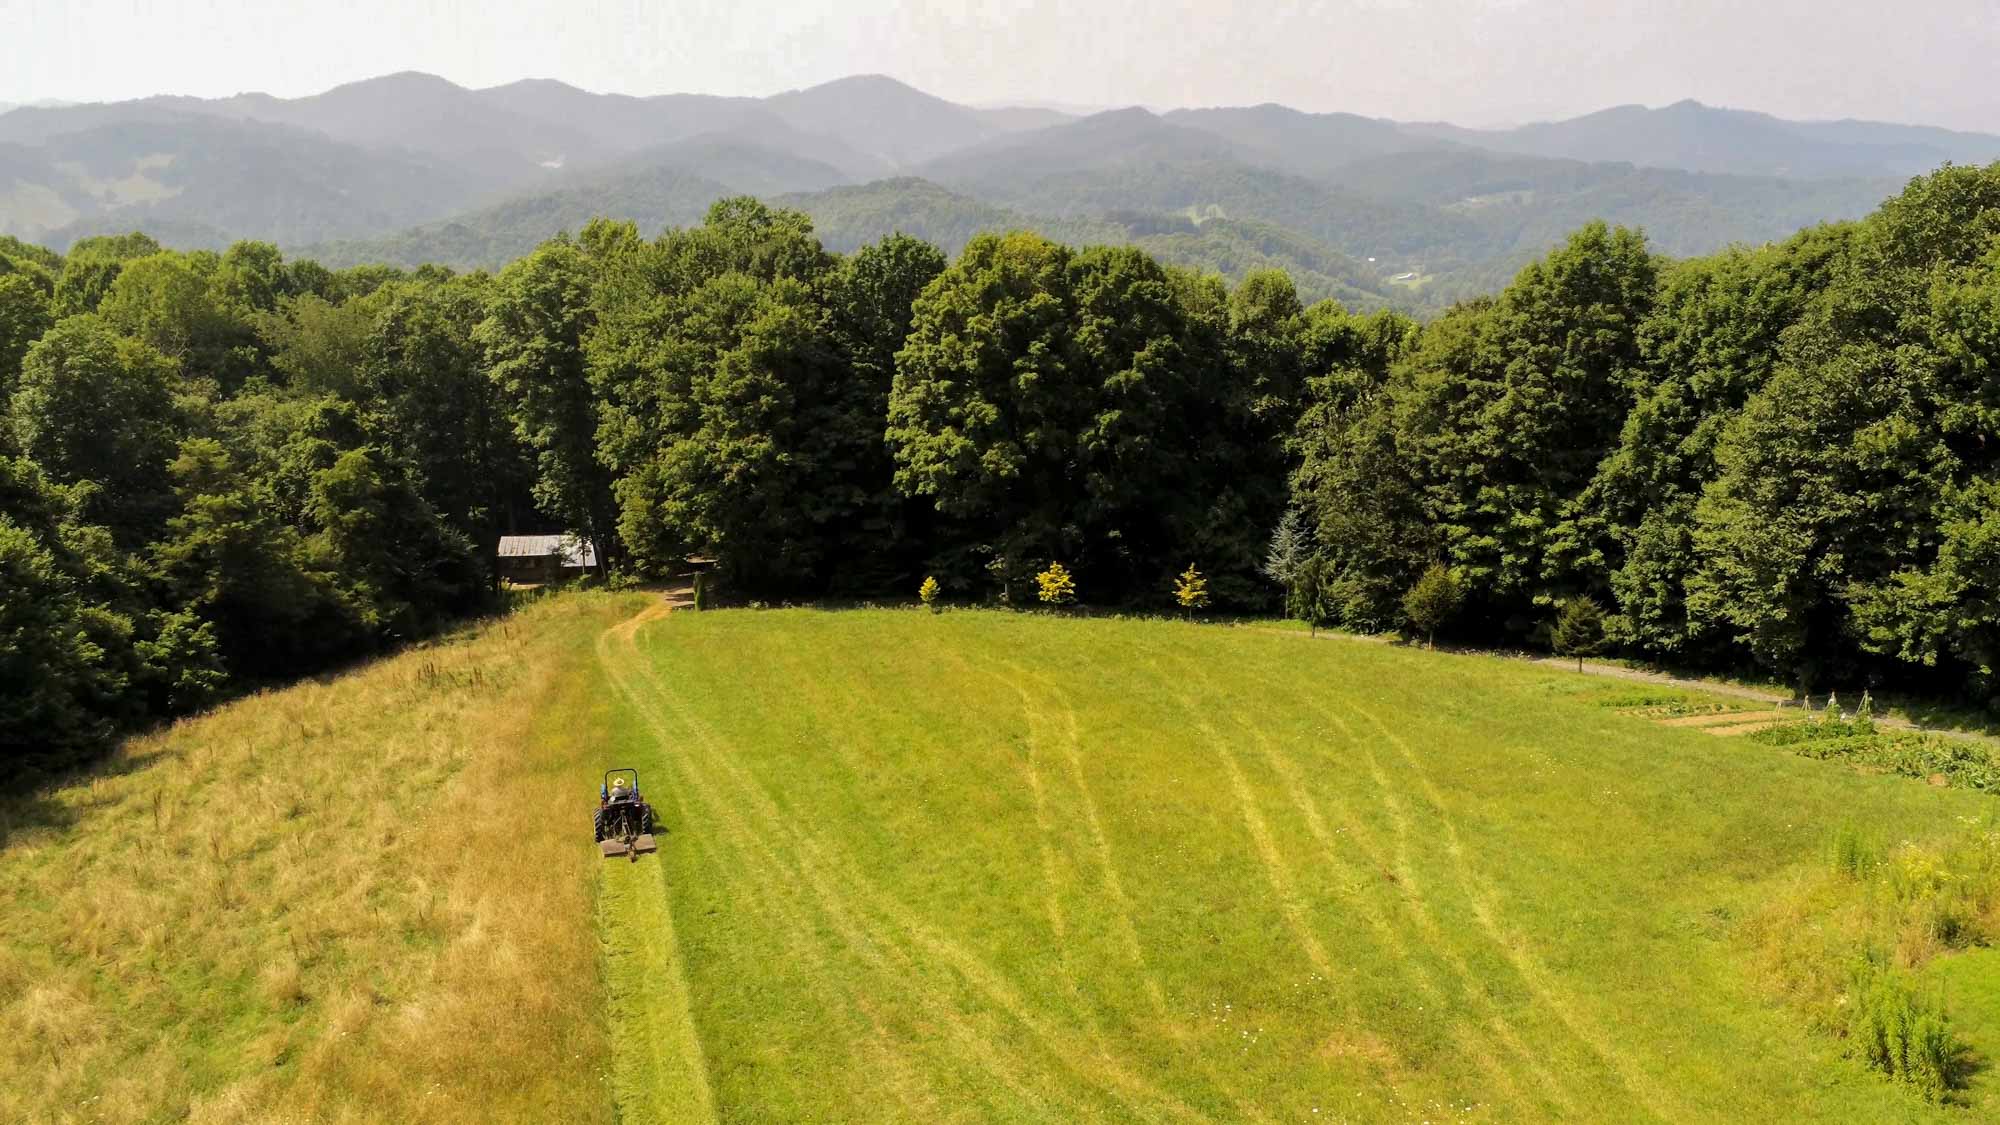 Overhead shot of a riding lawnmower clearing an overgrown field with mountains in the background